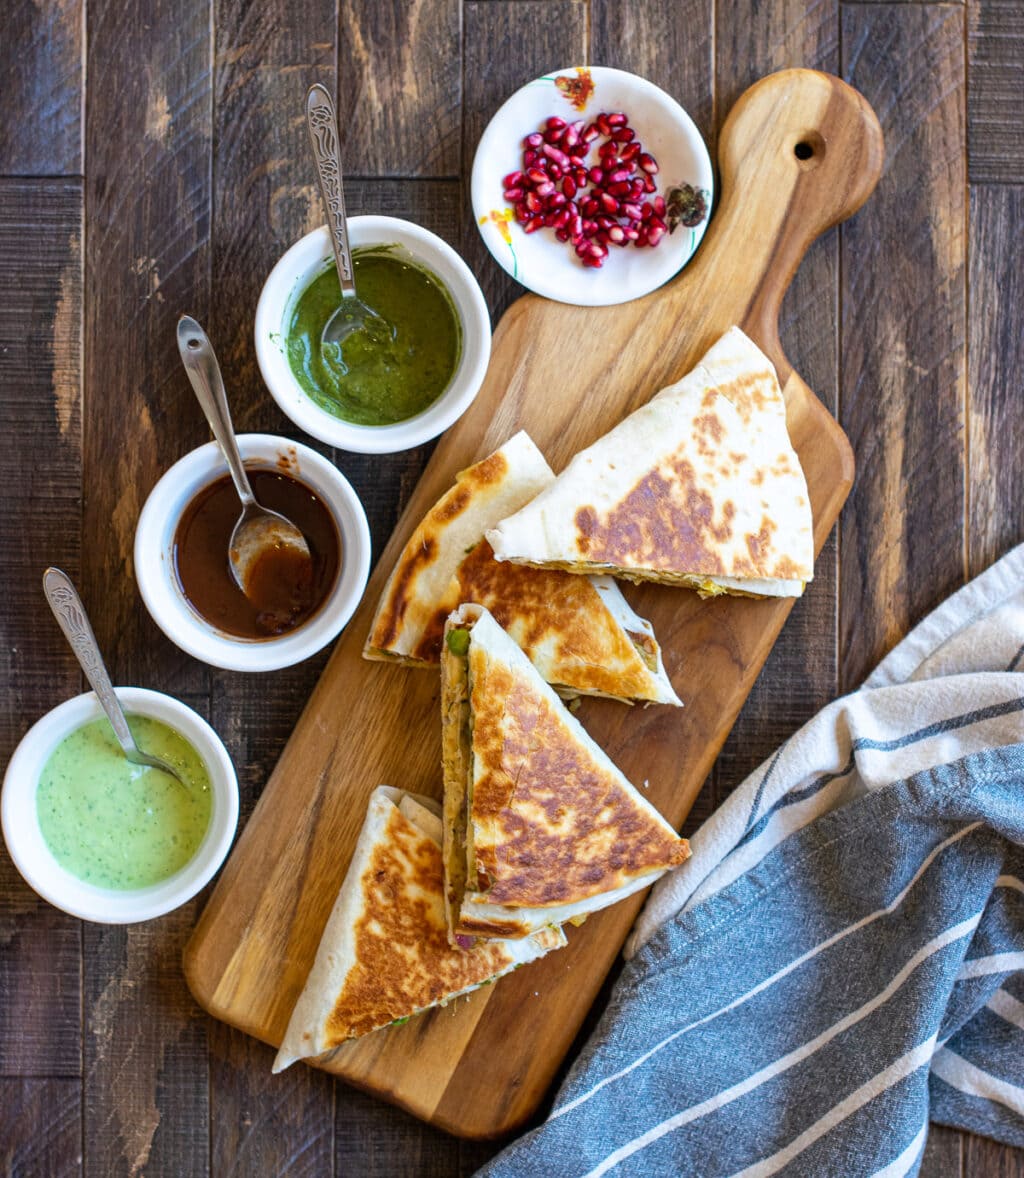 Samosa quesadillas served with pomegranate and dips on the side. 